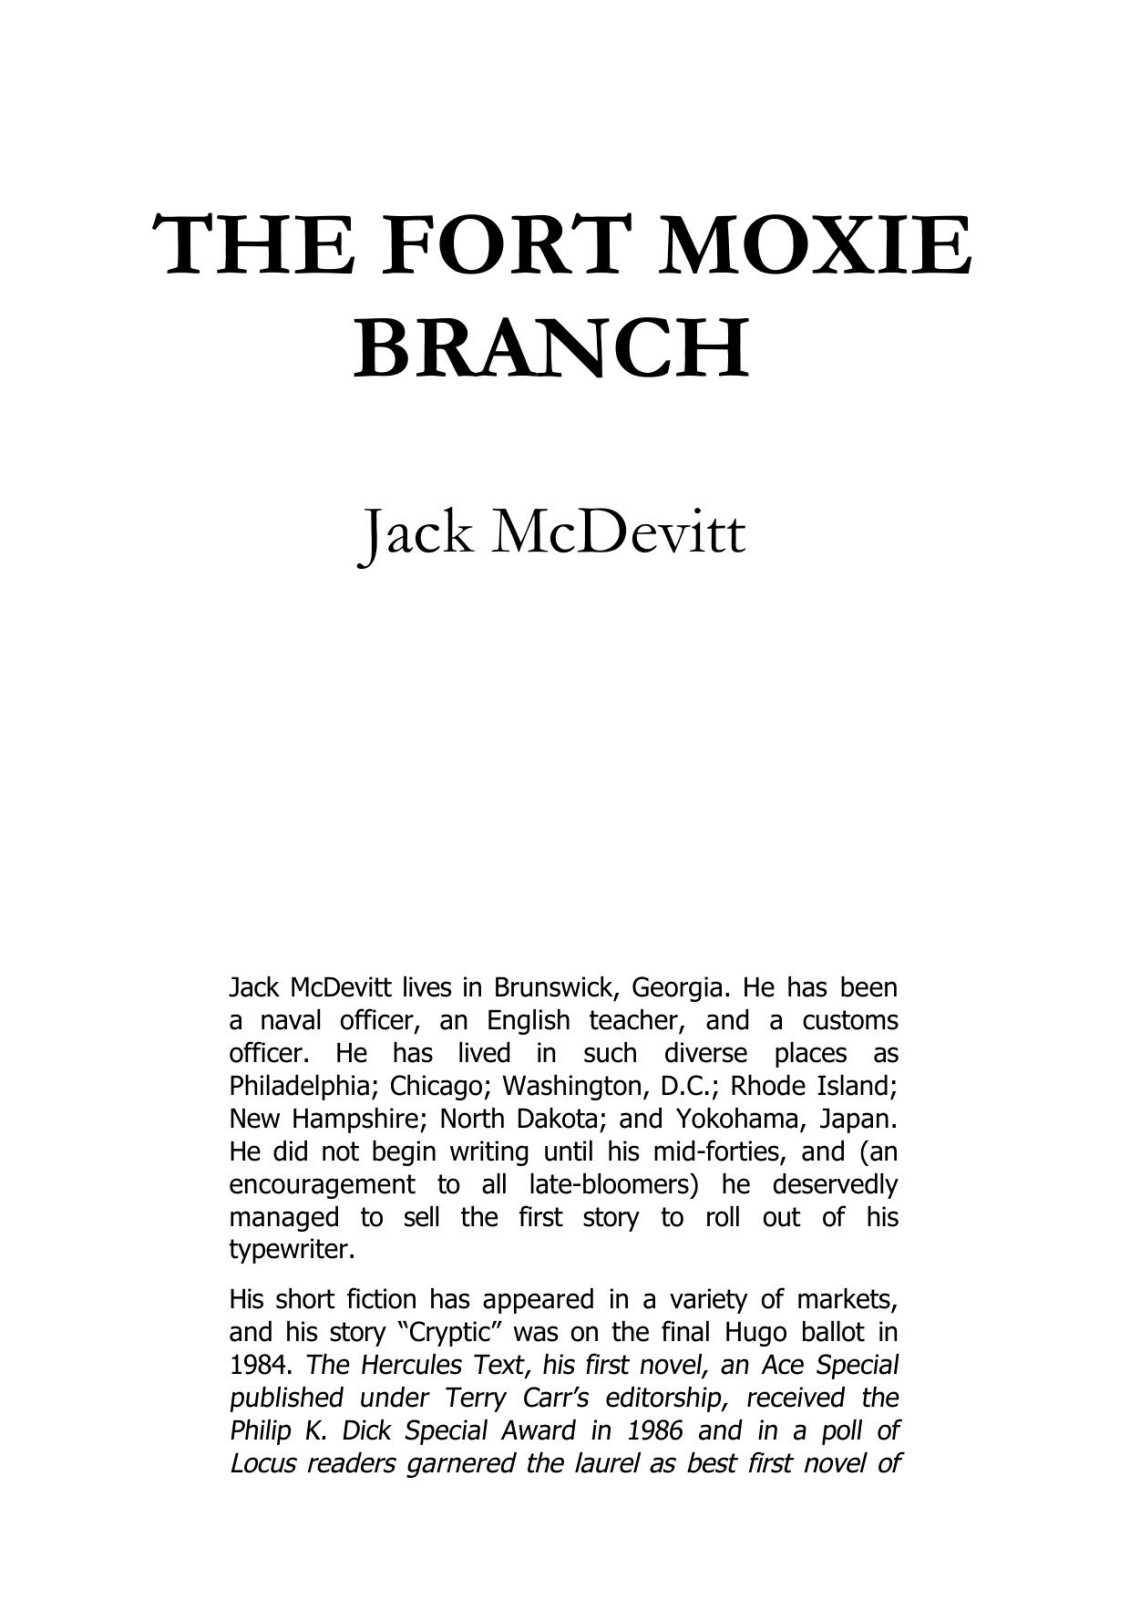 The Fort Moxie Branch